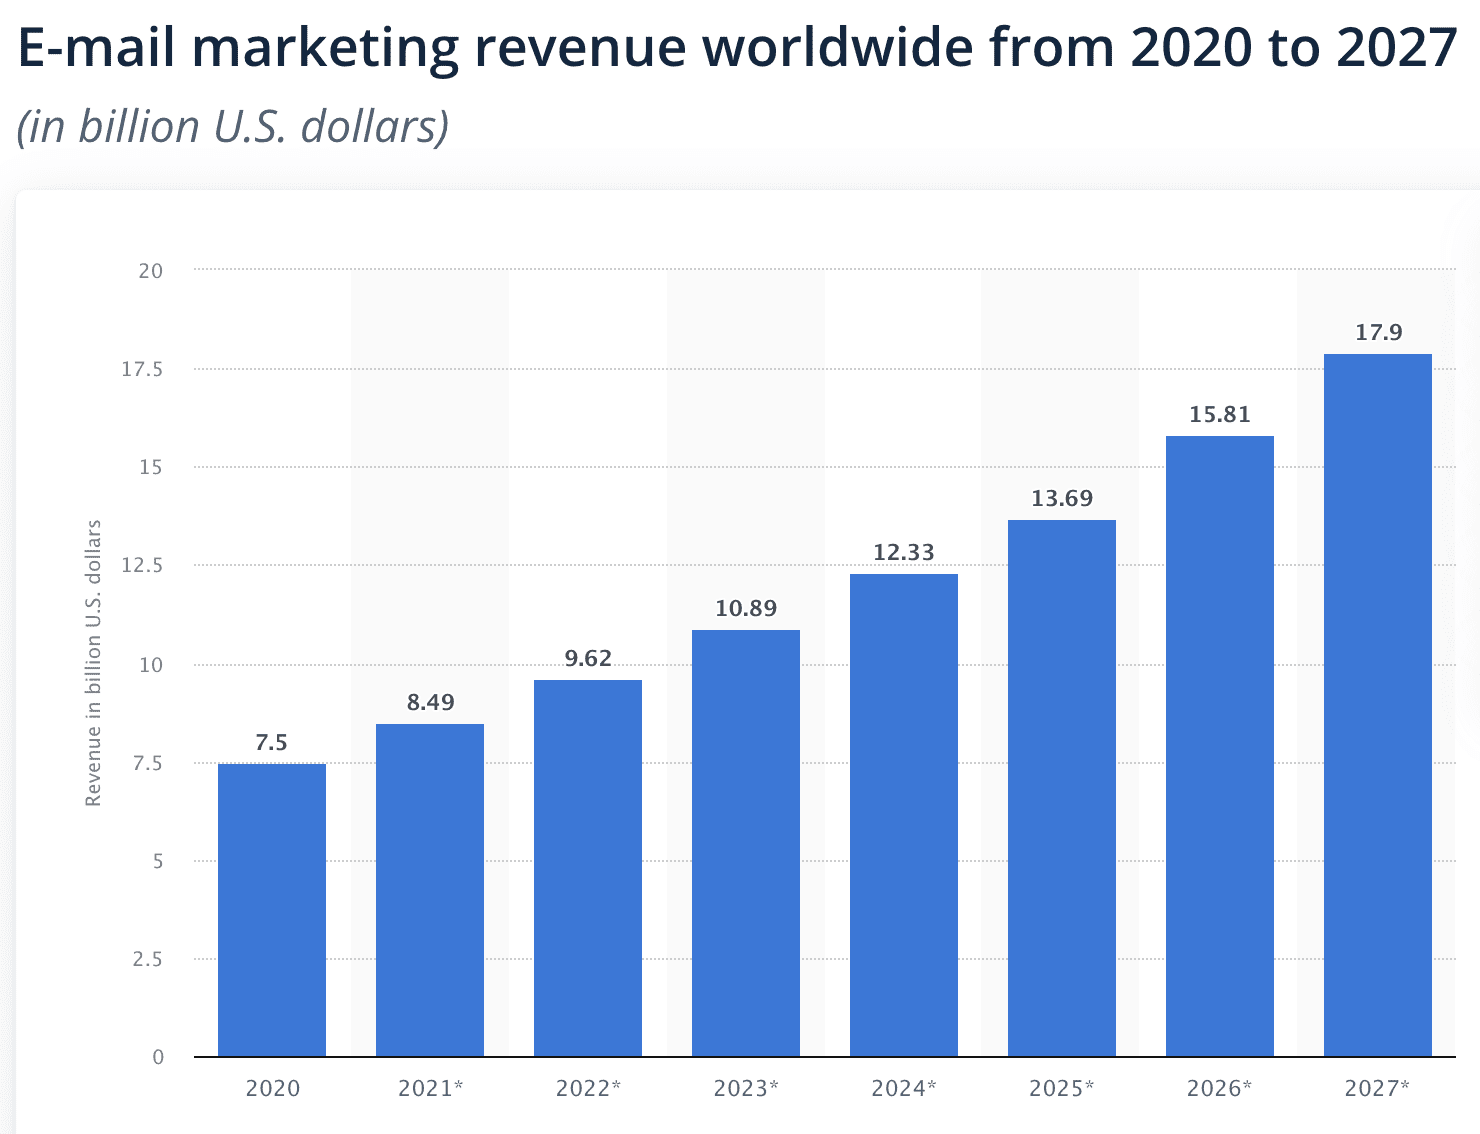 Bar graph depicting increasing email marketing revenues year-over-year from 2020 to 2027.